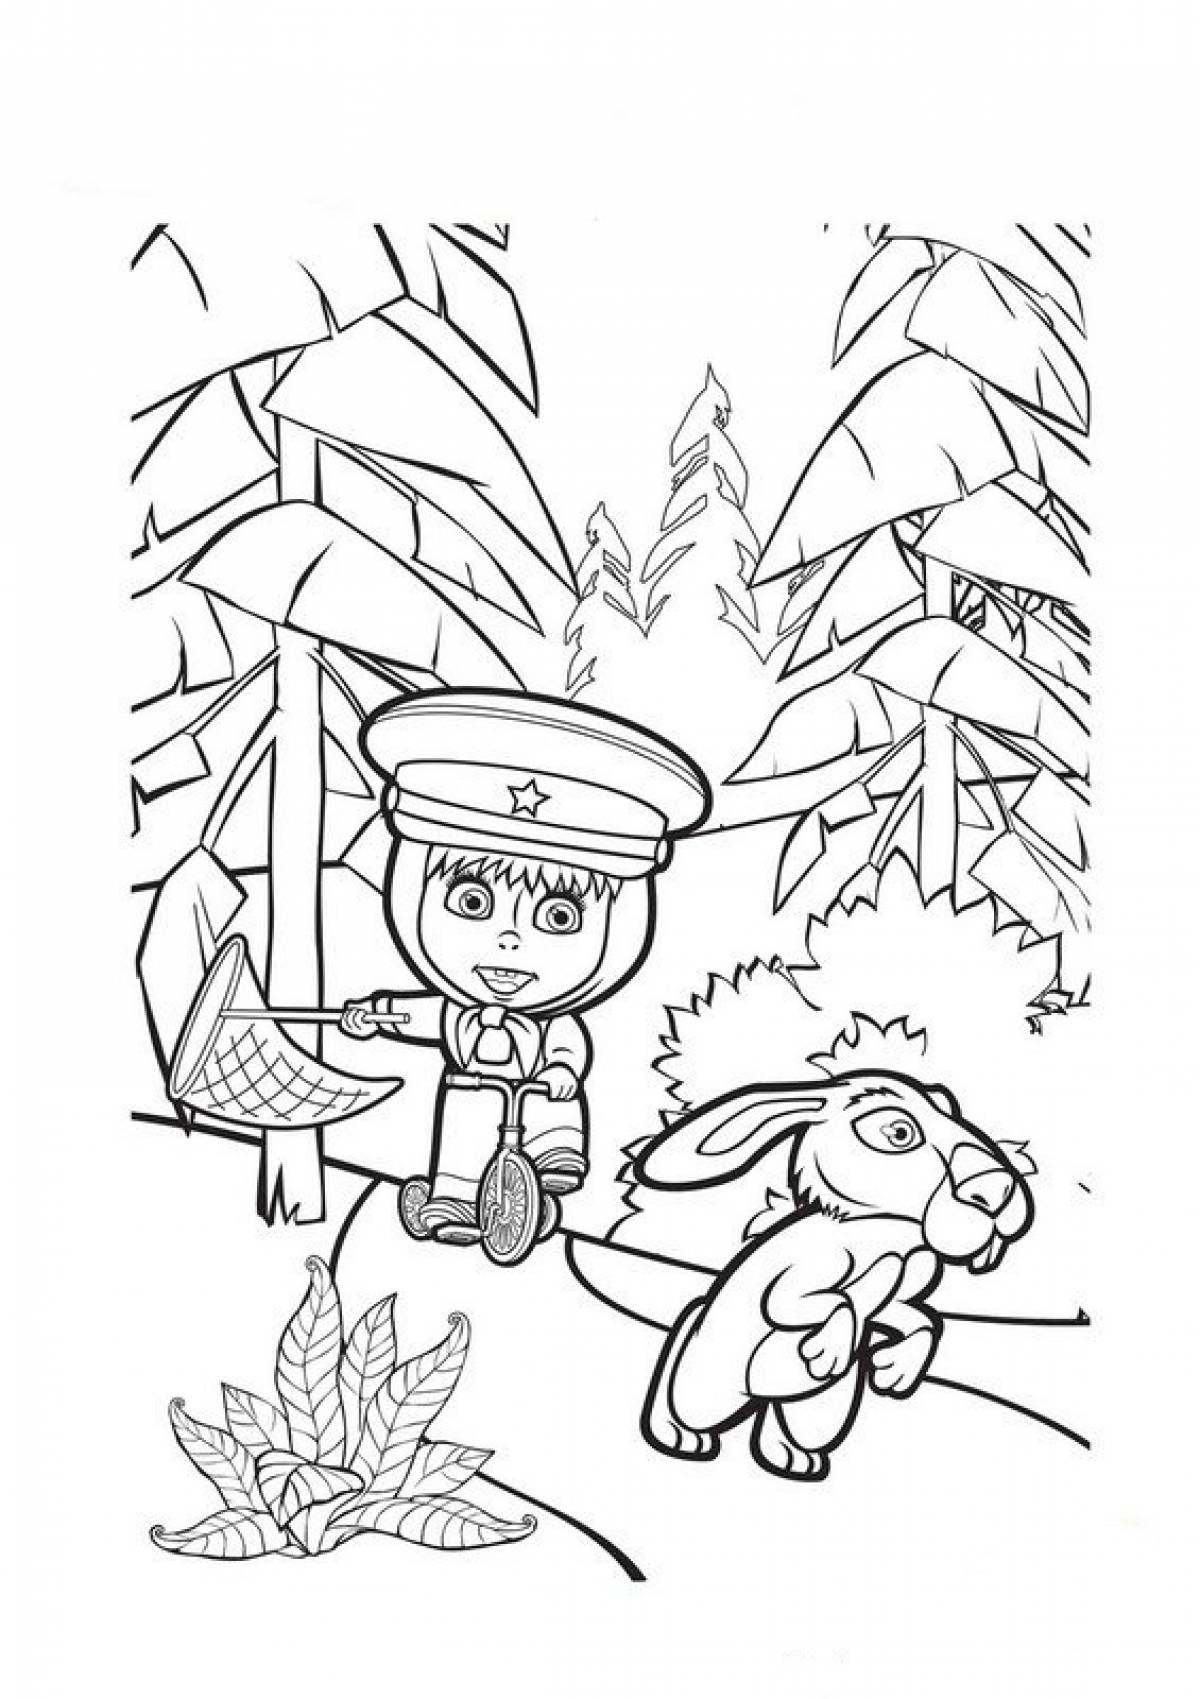 Coloring page Masha is catching a hare